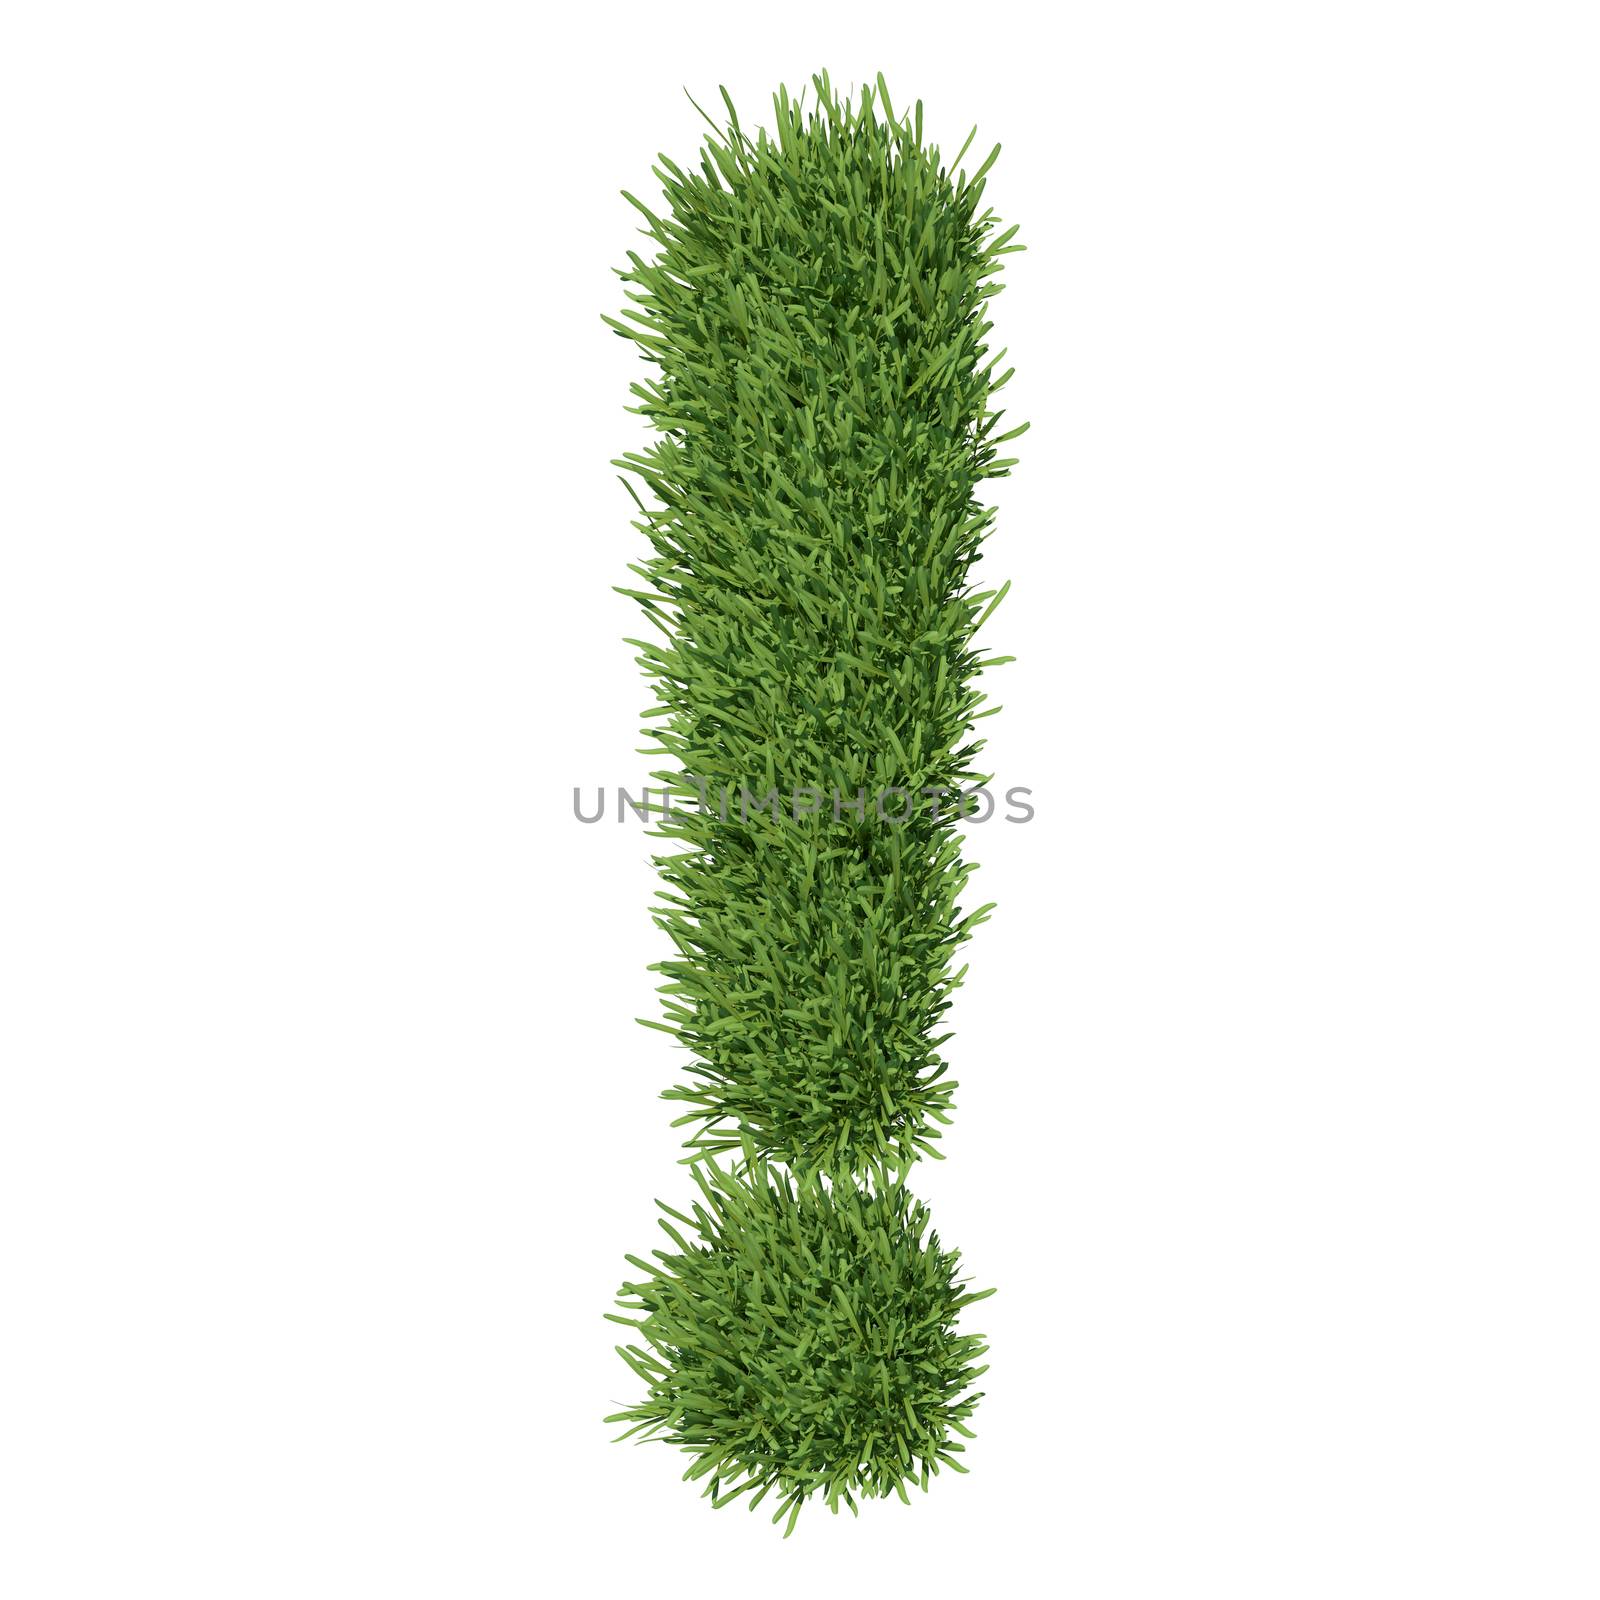 Exclamation mark made of grass. Isolated render on a white background